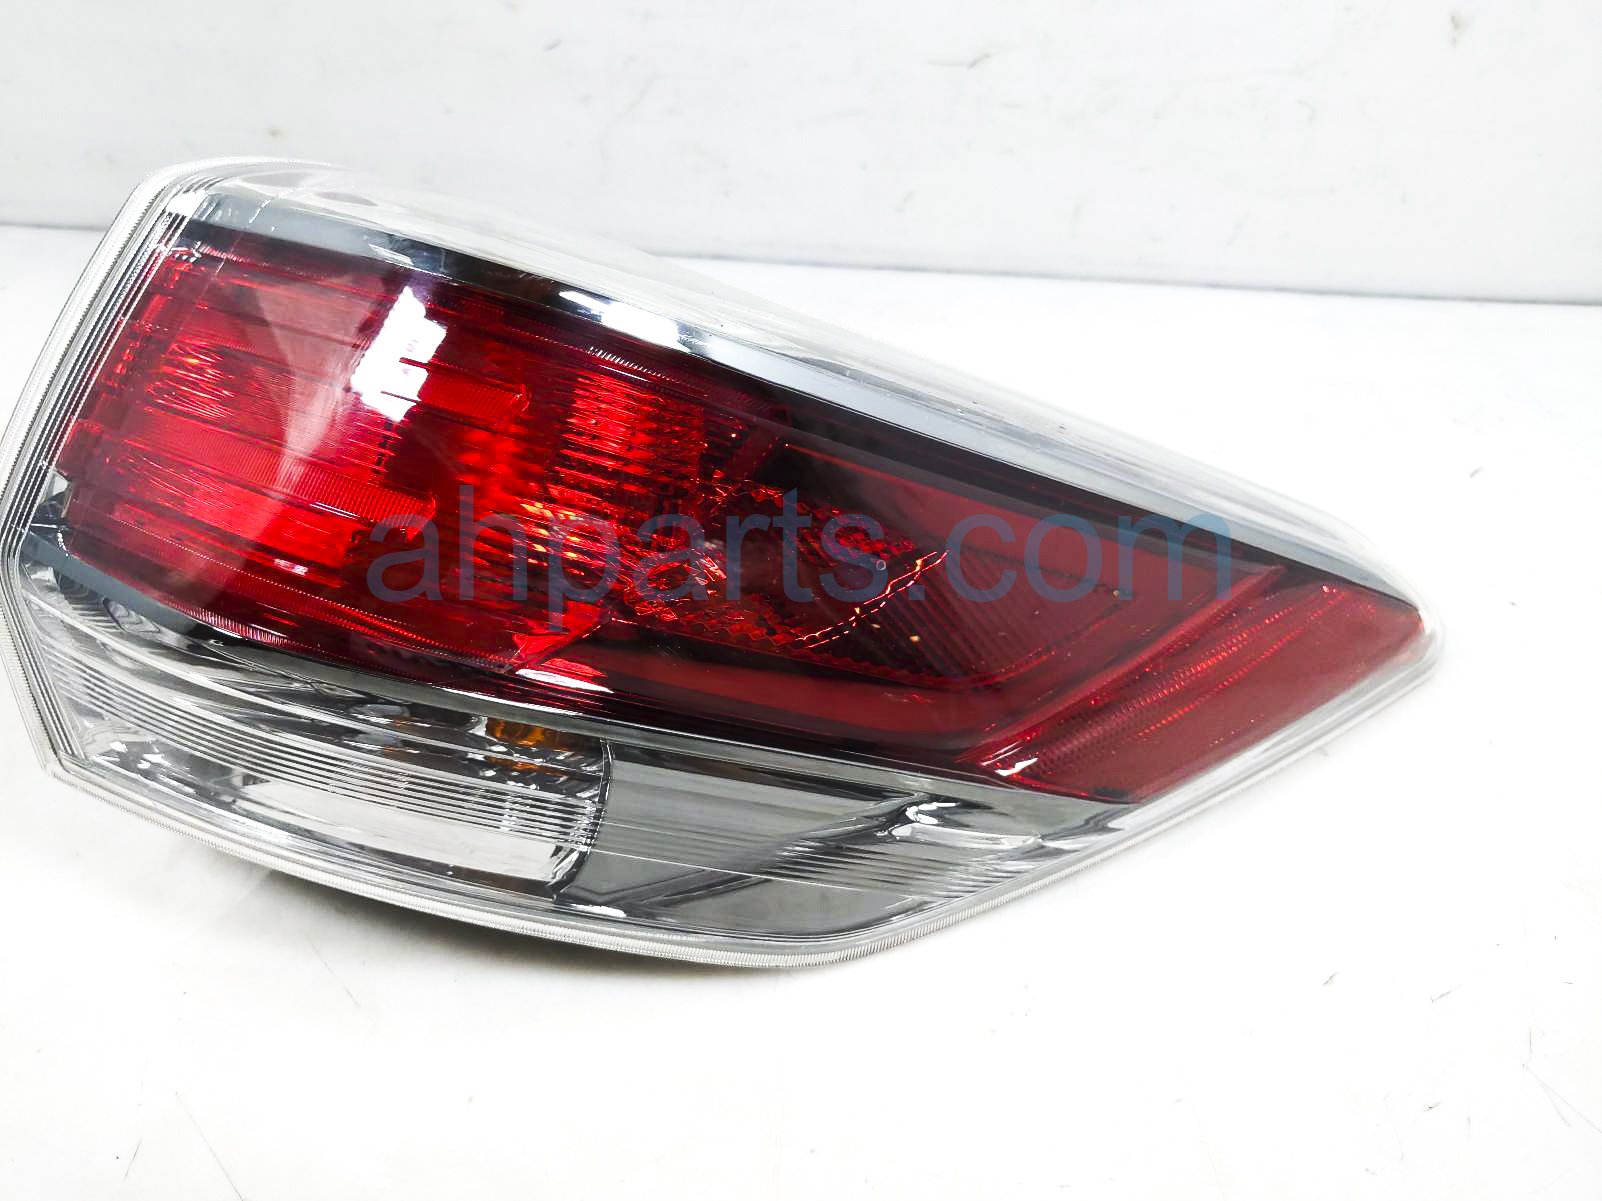 $100 Toyota LH TAIL LAMP (ON BODY)